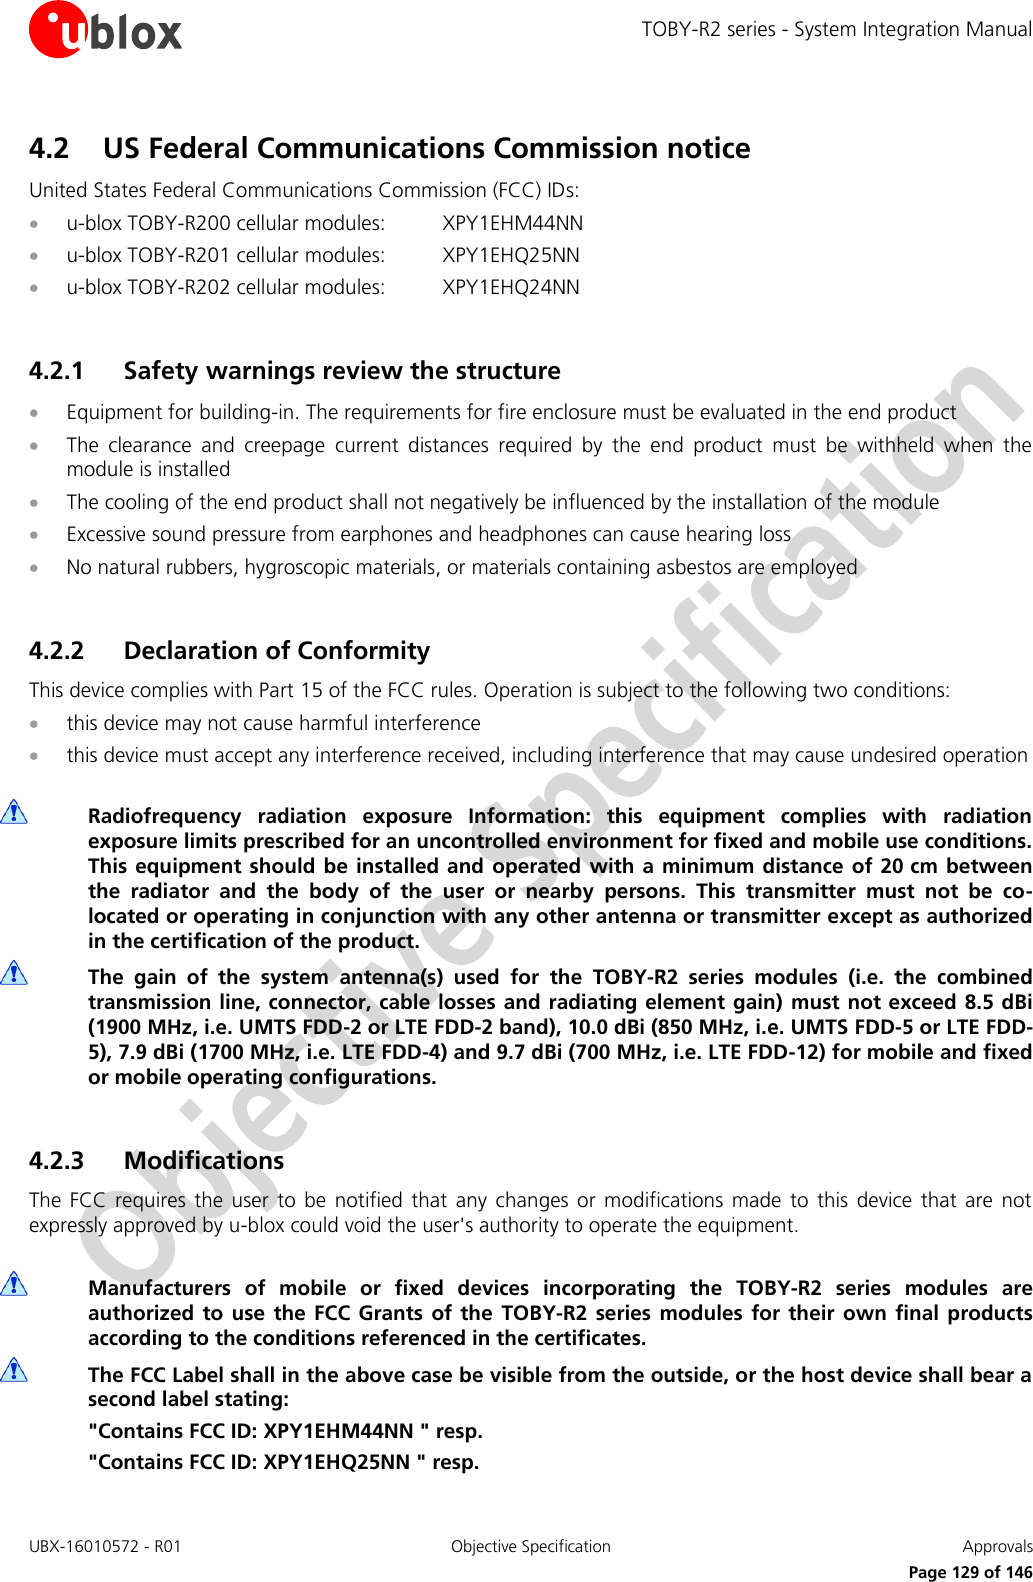 TOBY-R2 series - System Integration Manual UBX-16010572 - R01  Objective Specification  Approvals     Page 129 of 146 4.2 US Federal Communications Commission notice United States Federal Communications Commission (FCC) IDs:  u-blox TOBY-R200 cellular modules:  XPY1EHM44NN  u-blox TOBY-R201 cellular modules:  XPY1EHQ25NN  u-blox TOBY-R202 cellular modules:  XPY1EHQ24NN  4.2.1 Safety warnings review the structure  Equipment for building-in. The requirements for fire enclosure must be evaluated in the end product  The  clearance  and  creepage  current  distances  required  by  the  end  product  must  be  withheld  when  the module is installed  The cooling of the end product shall not negatively be influenced by the installation of the module  Excessive sound pressure from earphones and headphones can cause hearing loss  No natural rubbers, hygroscopic materials, or materials containing asbestos are employed  4.2.2 Declaration of Conformity This device complies with Part 15 of the FCC rules. Operation is subject to the following two conditions:  this device may not cause harmful interference  this device must accept any interference received, including interference that may cause undesired operation   Radiofrequency  radiation  exposure  Information:  this  equipment  complies  with  radiation exposure limits prescribed for an uncontrolled environment for fixed and mobile use conditions. This equipment  should be installed  and operated  with  a  minimum distance of 20 cm between the  radiator  and  the  body  of  the  user  or  nearby  persons.  This  transmitter  must  not  be  co-located or operating in conjunction with any other antenna or transmitter except as authorized in the certification of the product.  The  gain  of  the  system  antenna(s)  used  for  the  TOBY-R2  series  modules  (i.e.  the  combined transmission line, connector, cable losses and radiating element gain)  must not exceed  8.5 dBi (1900 MHz, i.e. UMTS FDD-2 or LTE FDD-2 band), 10.0 dBi (850 MHz, i.e. UMTS FDD-5 or LTE FDD-5), 7.9 dBi (1700 MHz, i.e. LTE FDD-4) and 9.7 dBi (700 MHz, i.e. LTE FDD-12) for mobile and fixed or mobile operating configurations.  4.2.3 Modifications The  FCC requires  the  user  to  be  notified  that  any  changes  or  modifications  made  to  this  device  that  are  not expressly approved by u-blox could void the user&apos;s authority to operate the equipment.   Manufacturers  of  mobile  or  fixed  devices  incorporating  the  TOBY-R2  series  modules  are authorized  to use  the  FCC  Grants of  the  TOBY-R2 series  modules  for  their  own  final  products according to the conditions referenced in the certificates.  The FCC Label shall in the above case be visible from the outside, or the host device shall bear a second label stating: &quot;Contains FCC ID: XPY1EHM44NN &quot; resp. &quot;Contains FCC ID: XPY1EHQ25NN &quot; resp. 